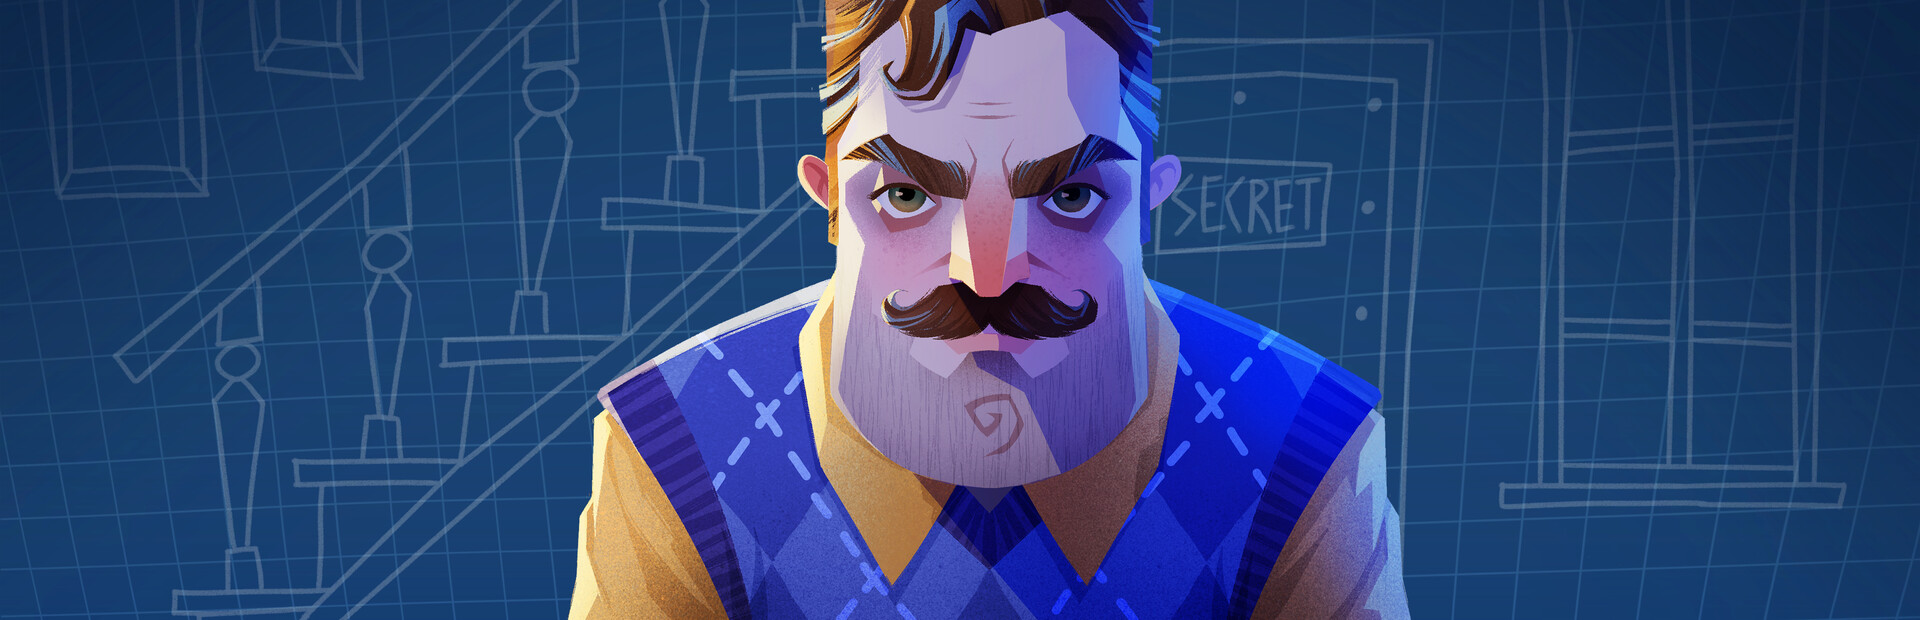 Hello Neighbor VR: Search and Rescue on Steam